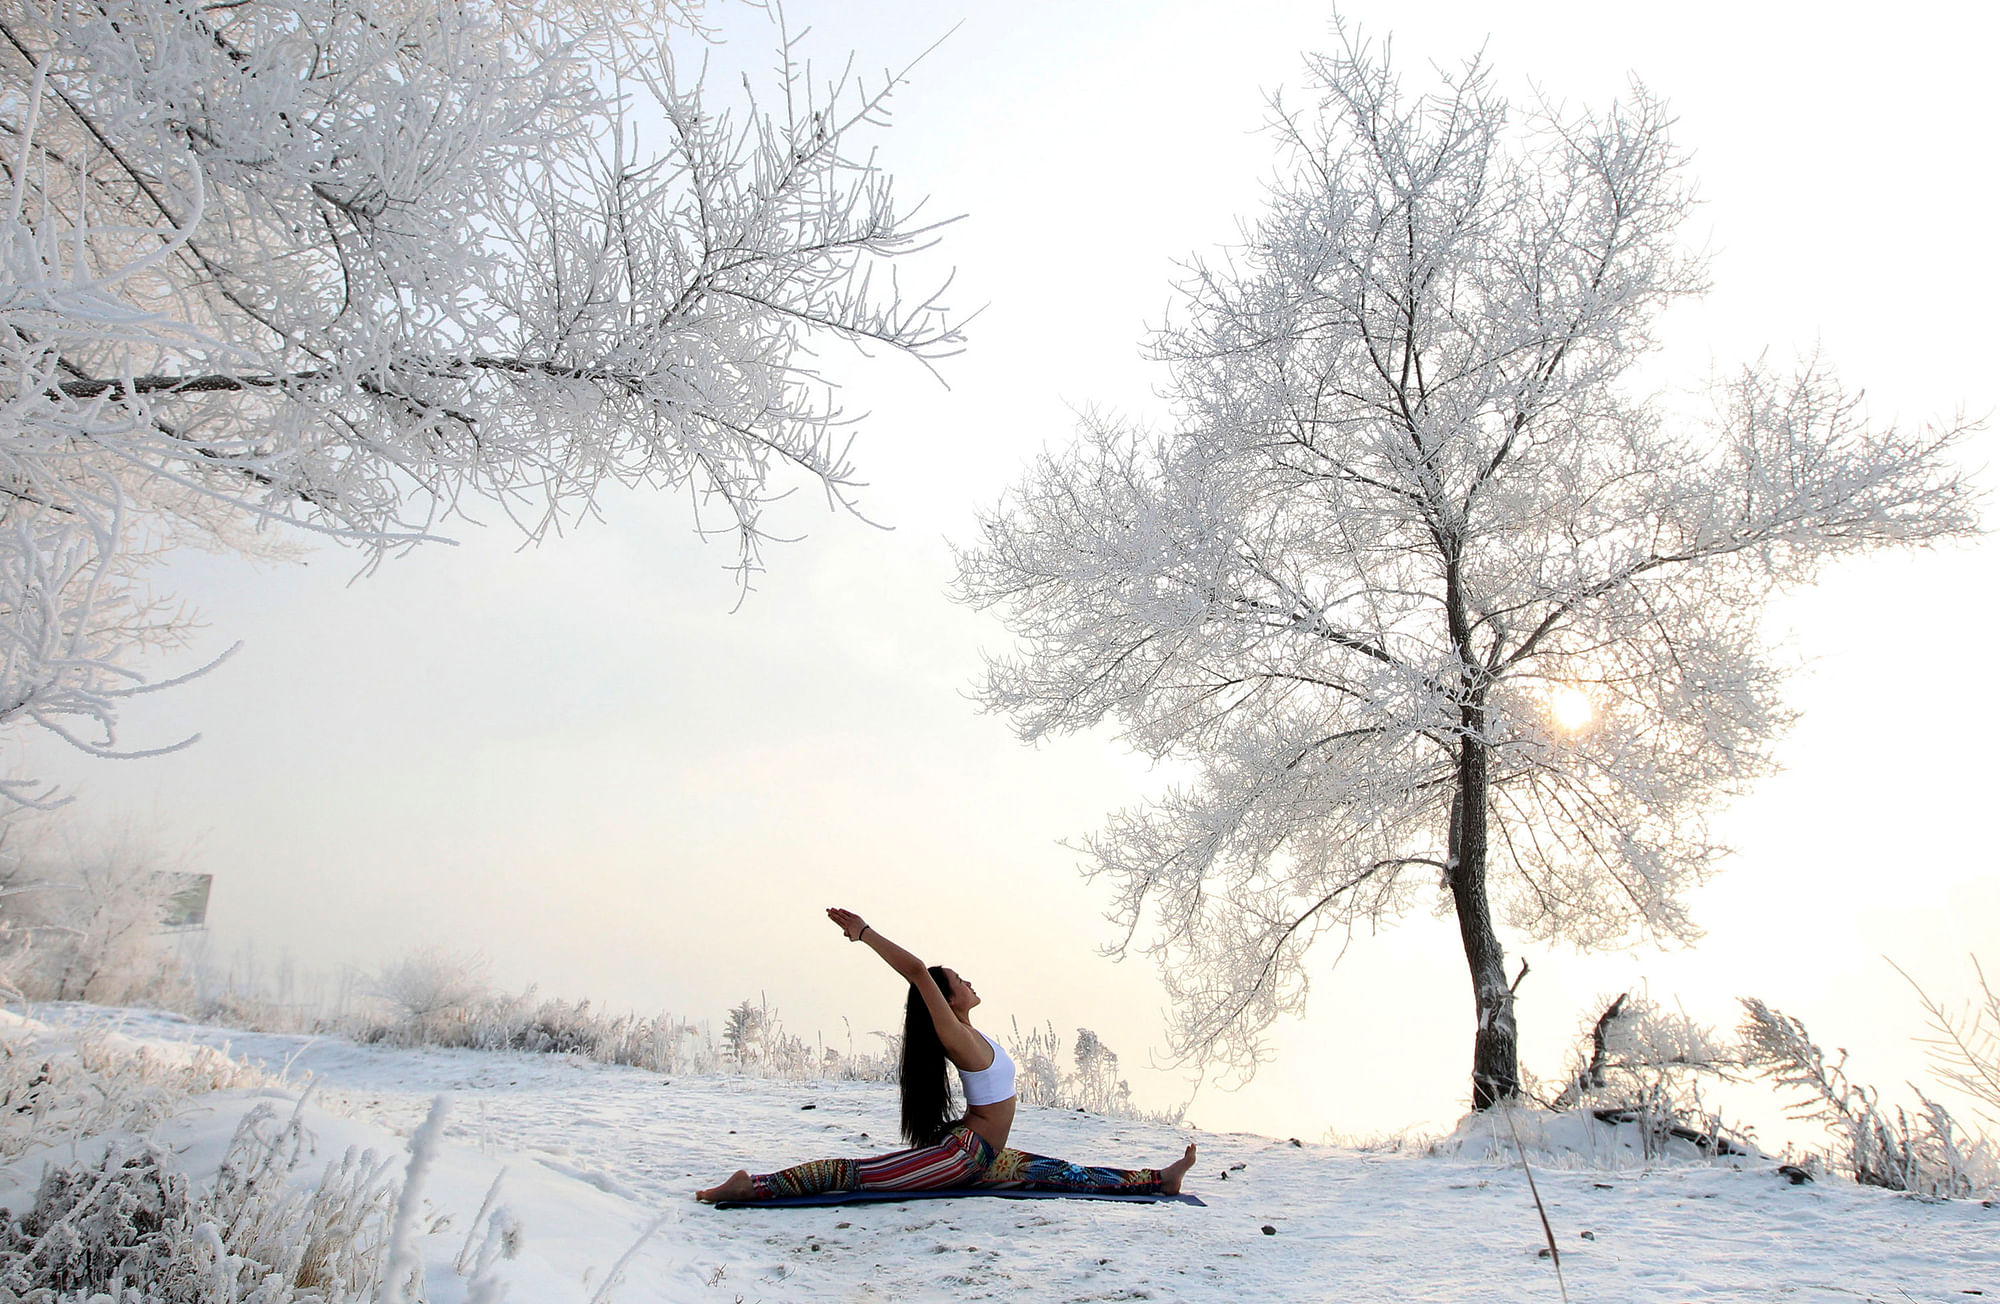 Xie Xiaoming, 26-year-old owner of a yoga club, practices yoga in thin clothes near trees covered by frosty fog on the snow-covered banks of Songhua River in Jilin. (Photo: Reuters)